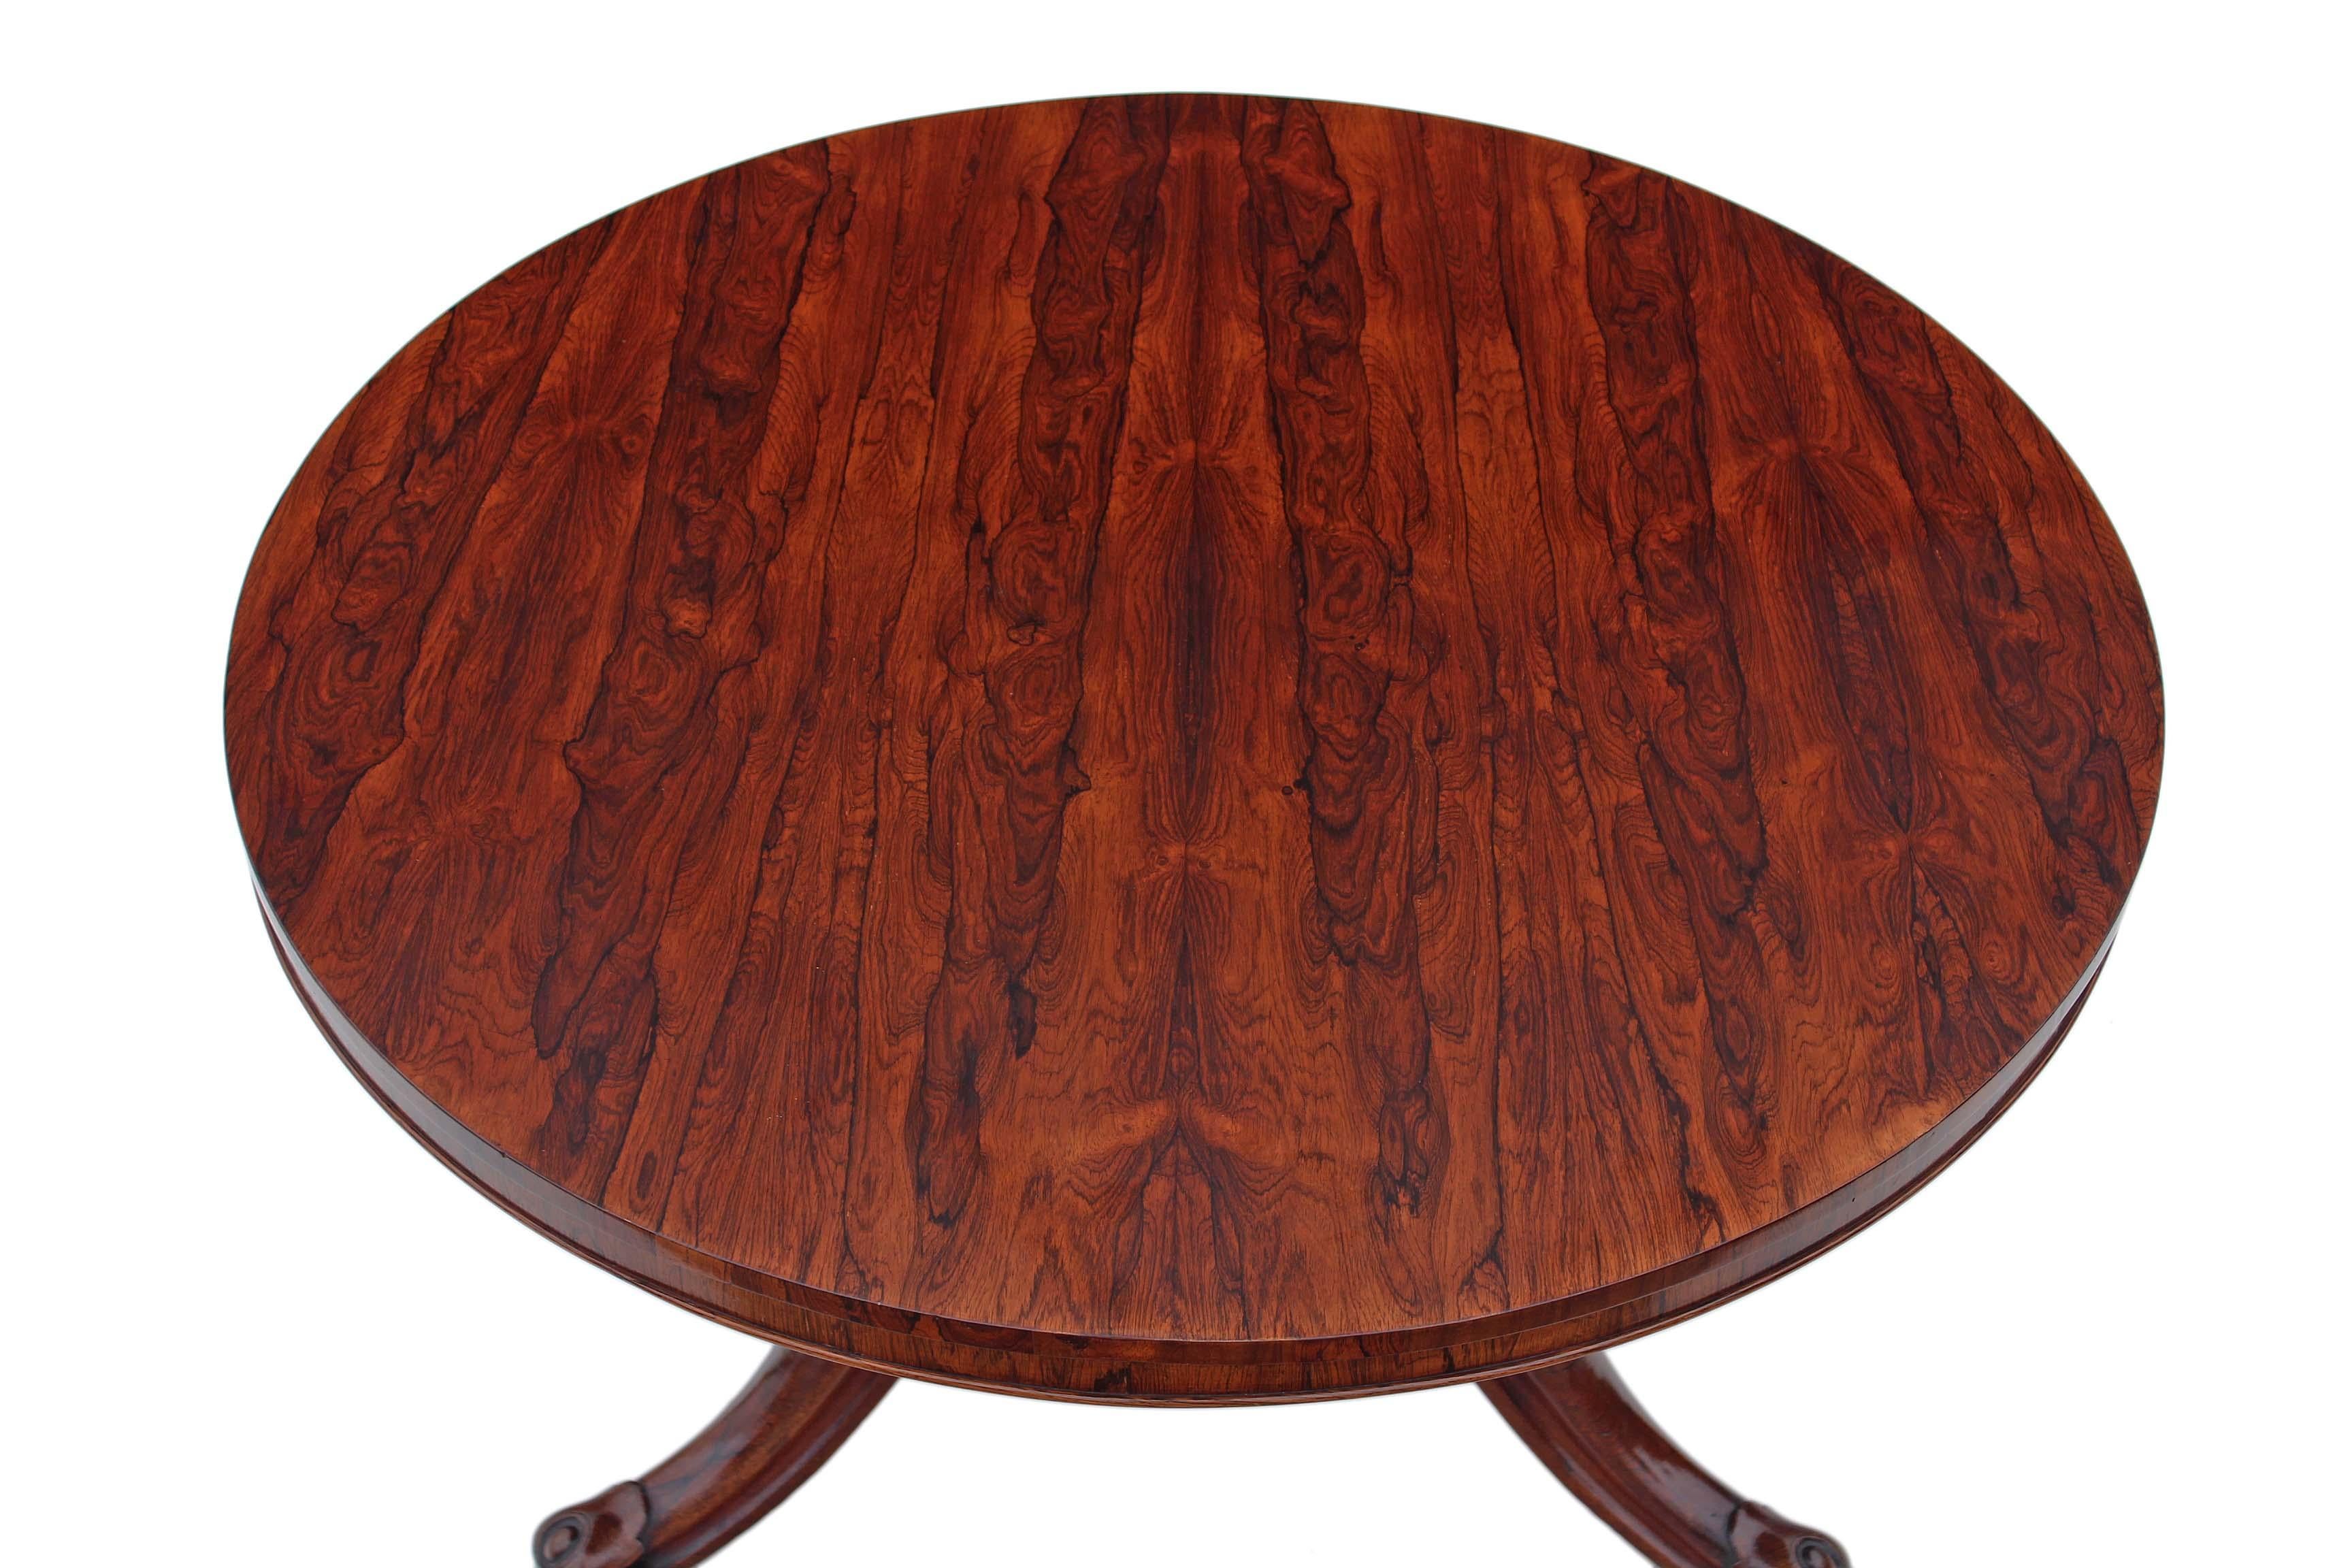 Victorian Rosewood Loo Breakfast Centre Table Tilt Top In Good Condition For Sale In Wisbech, Cambridgeshire